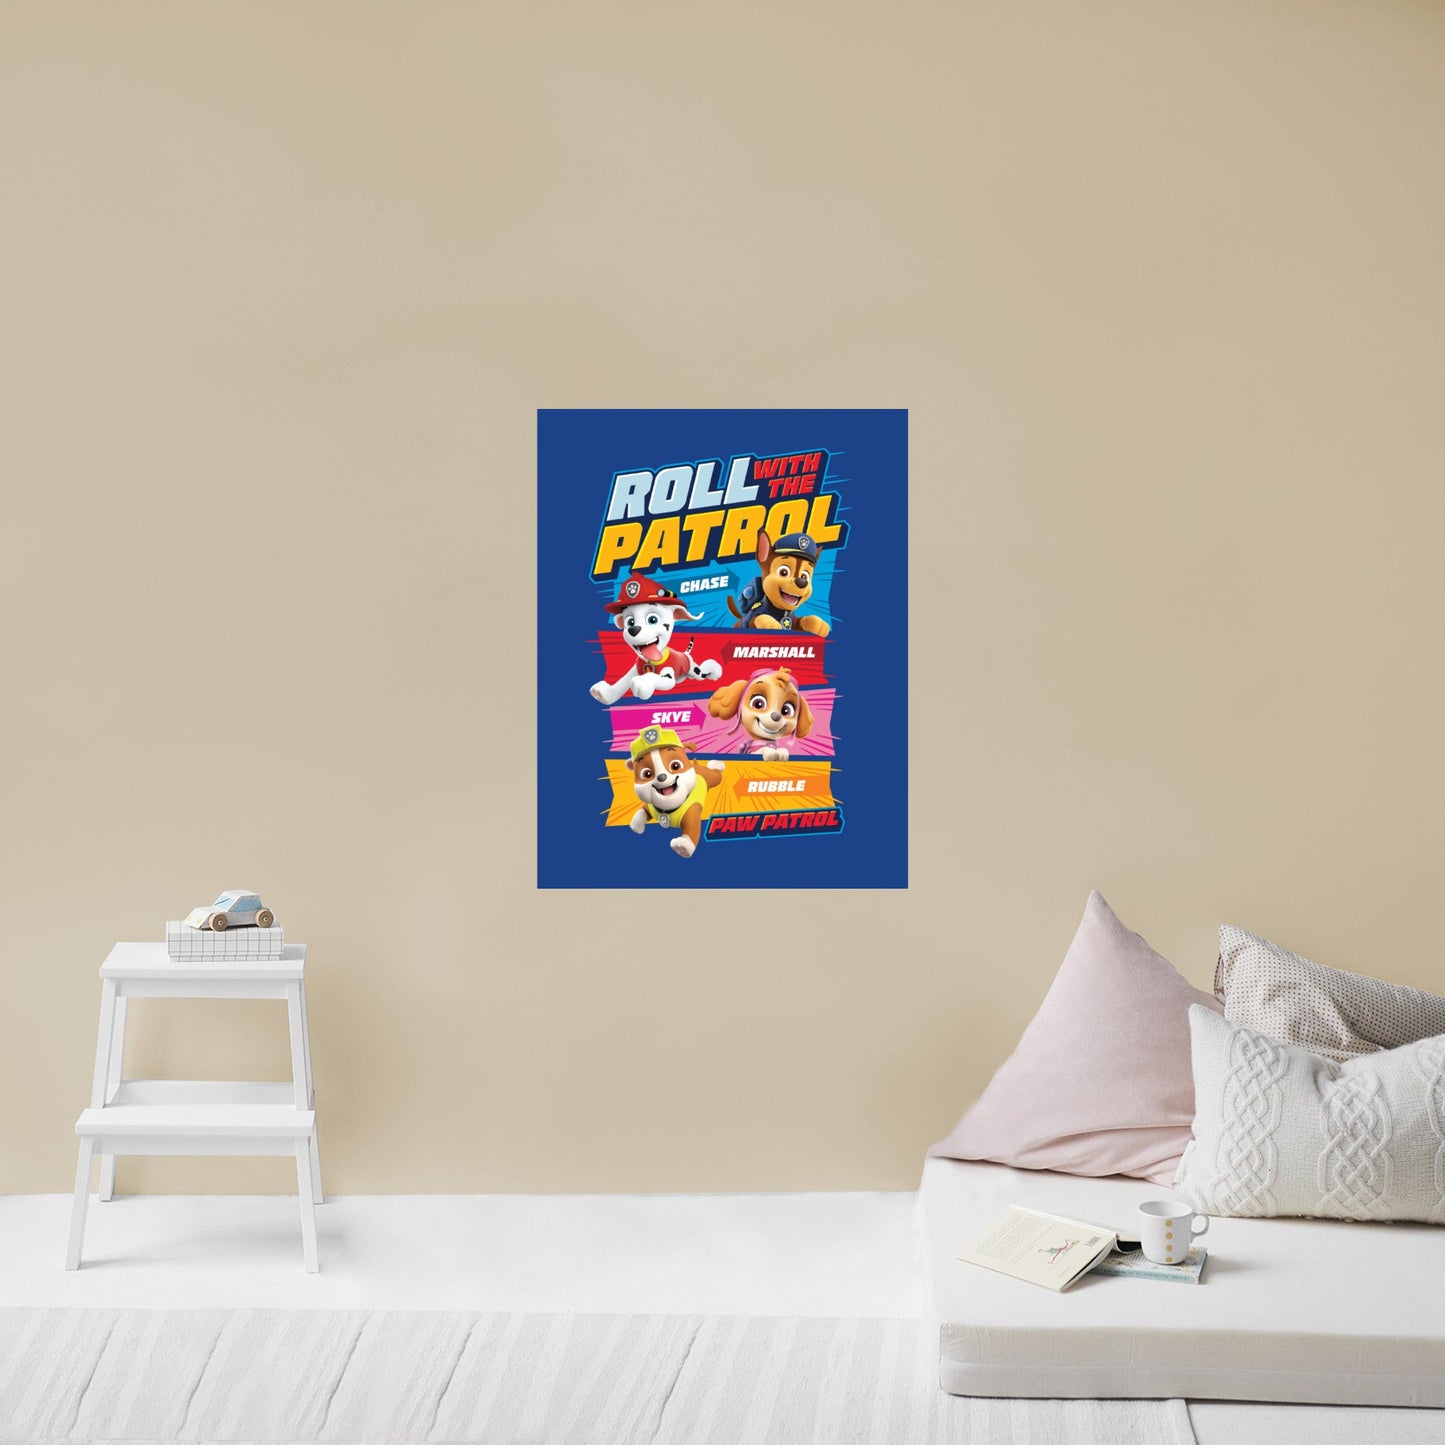 Paw Patrol: Roll with the Patrol Poster - Officially Licensed Nickelodeon Removable Adhesive Decal